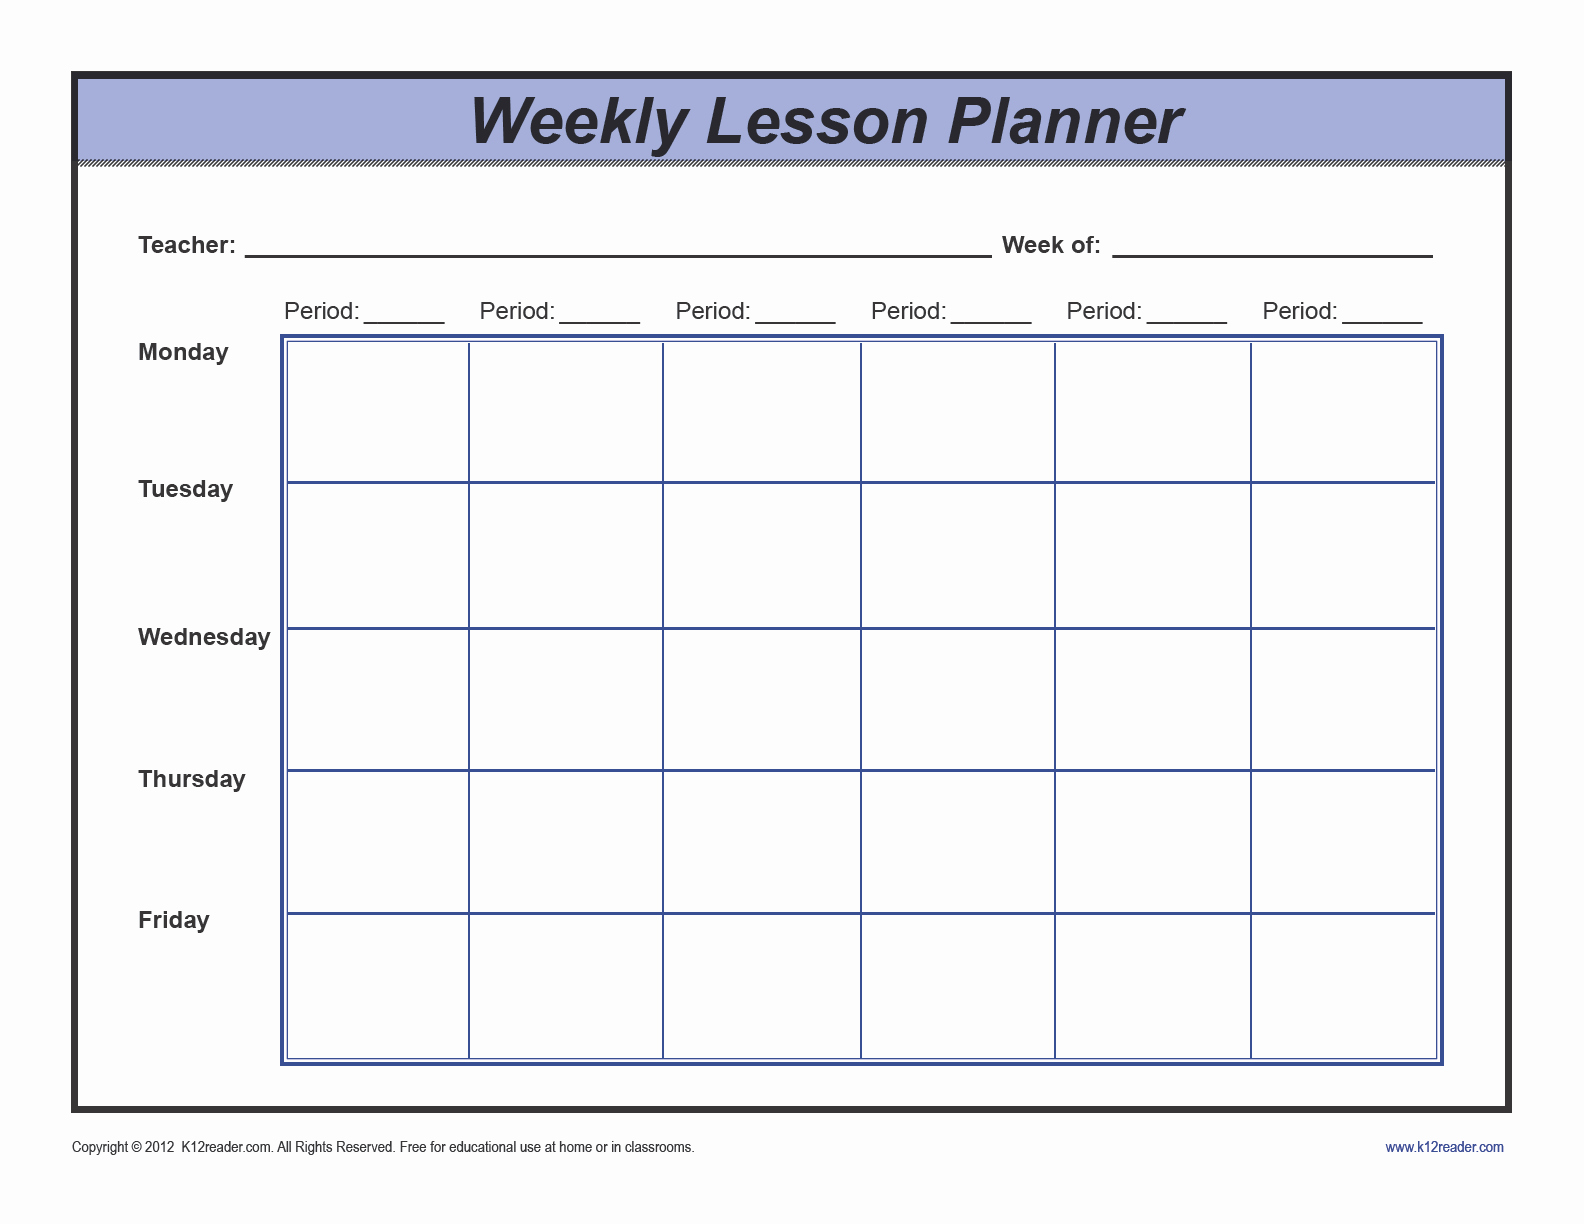 Weekly Lesson Plans Template Inspirational Download Weekly Lesson Plan Template Preschool